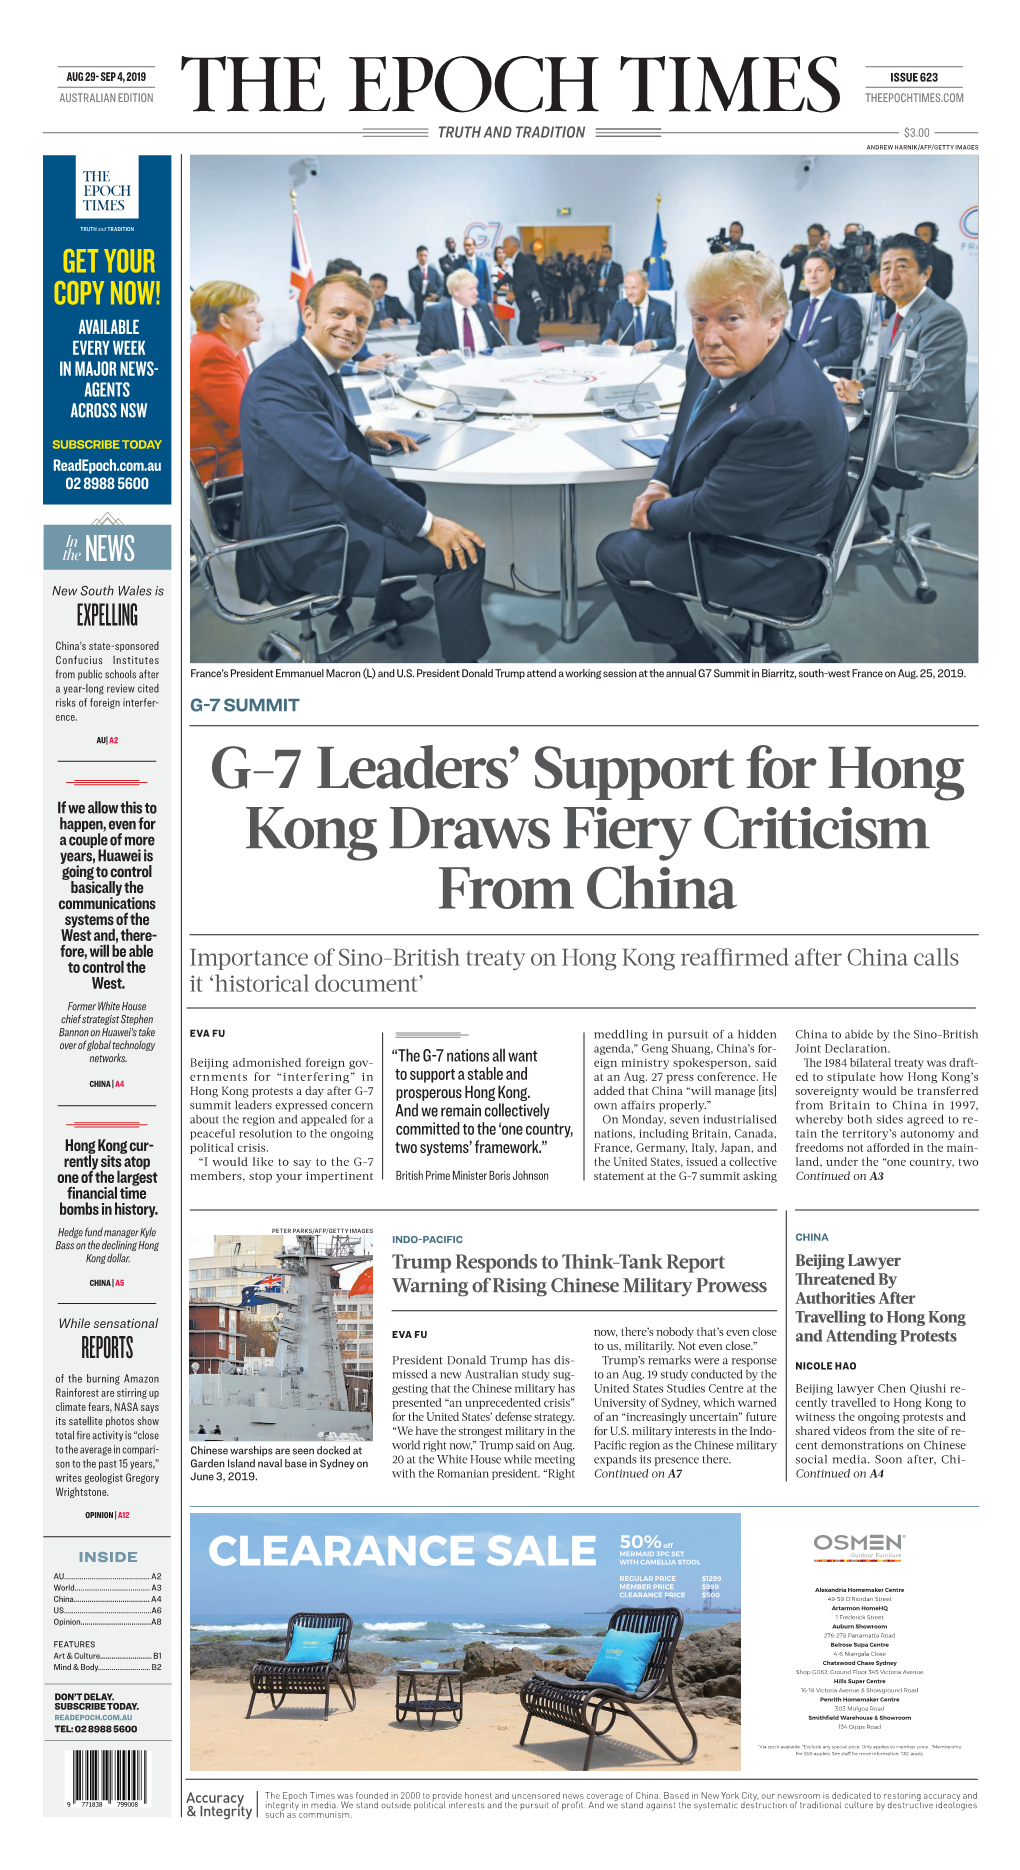 G-7 Leaders' Support for Hong Kong Draws Fiery Criticism from China